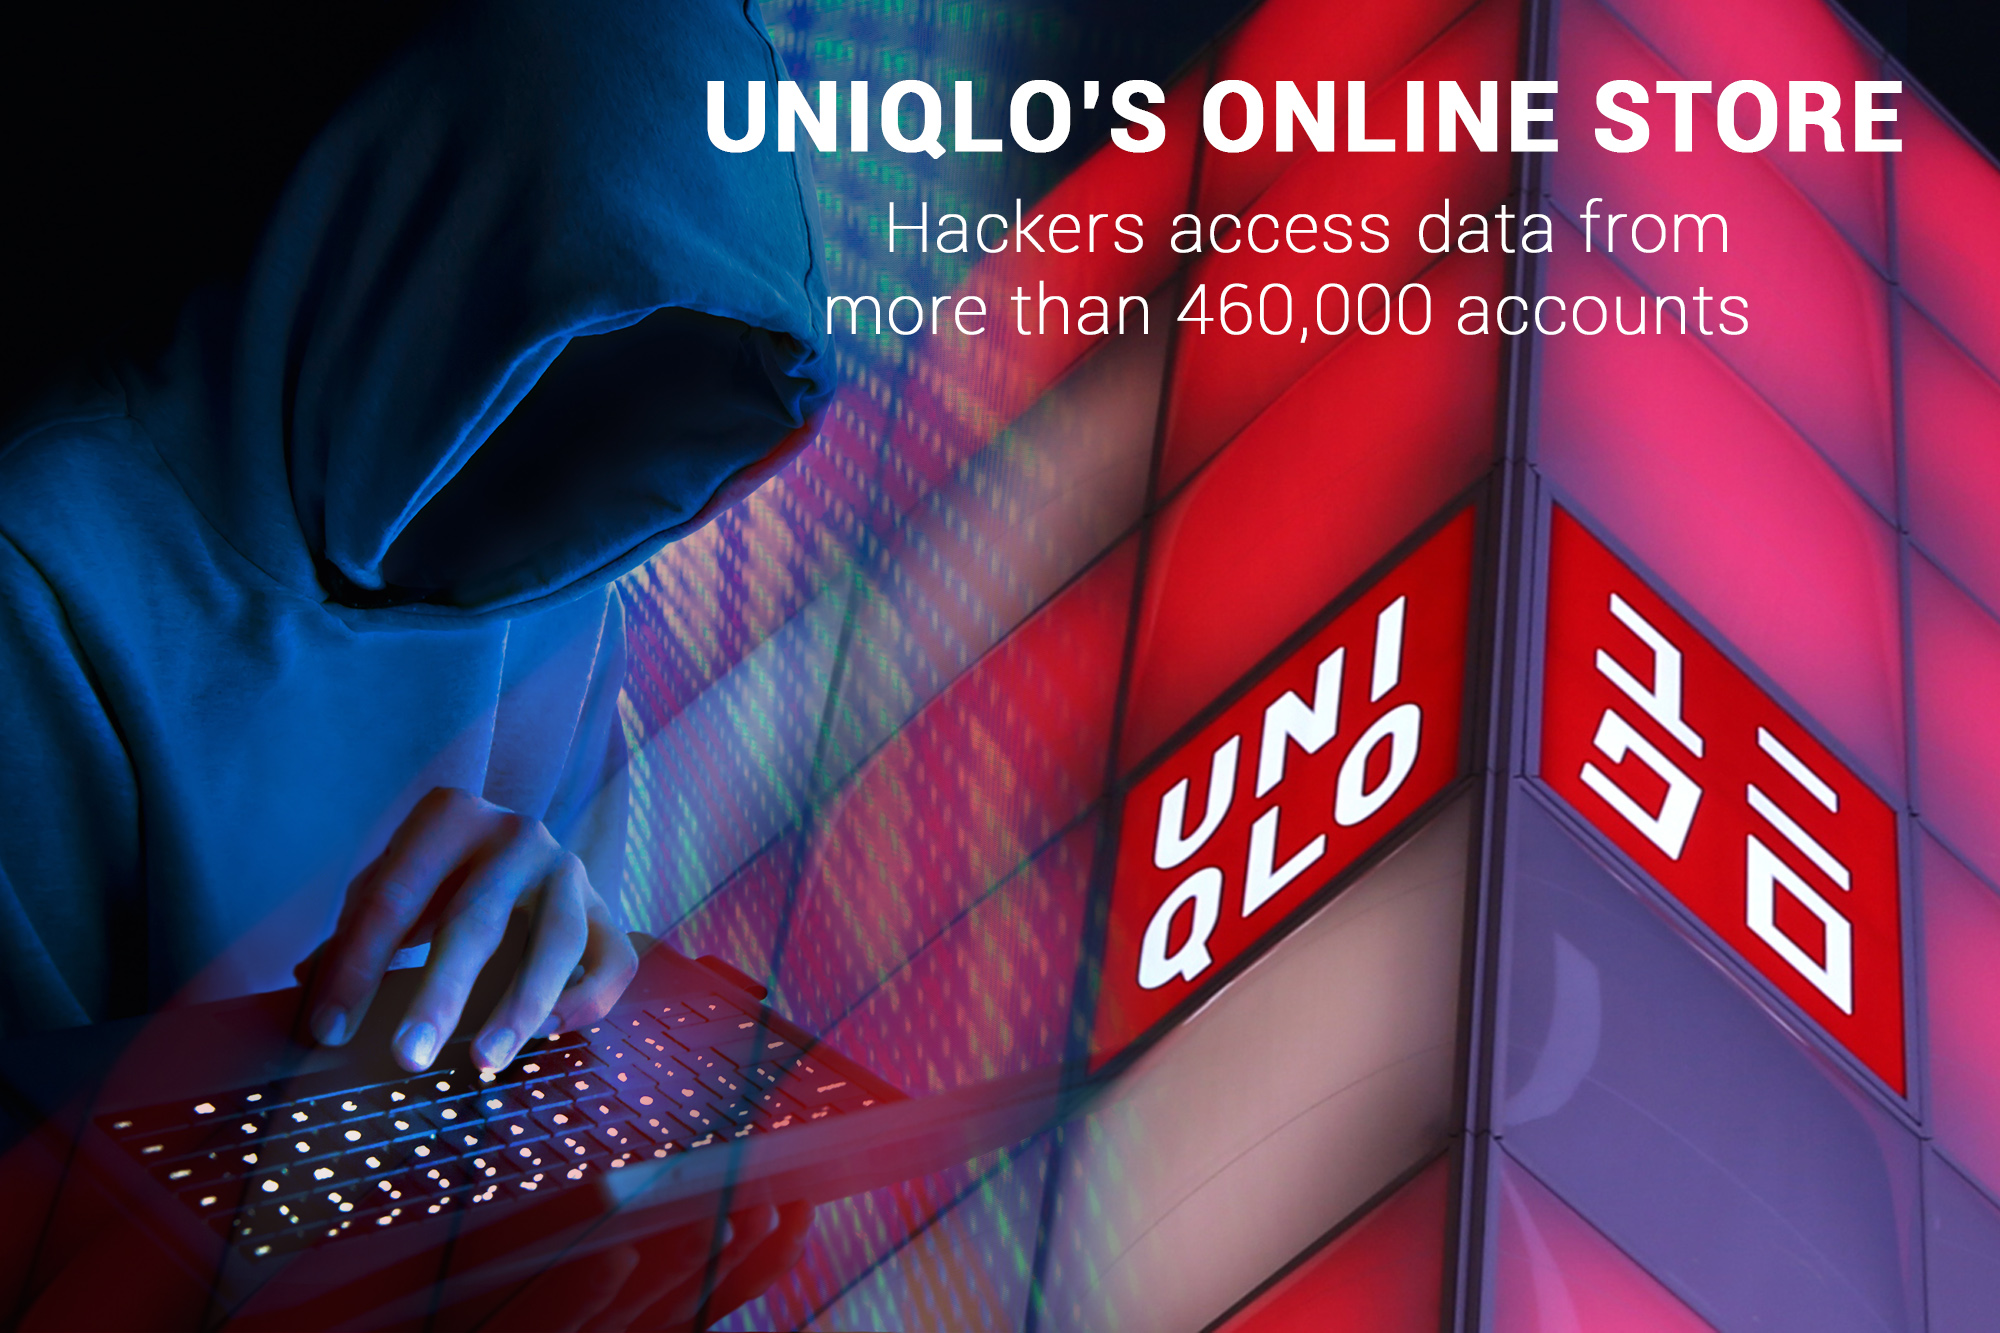 Over 460,000 Accounts Hacked at Uniqlo’s Online Store